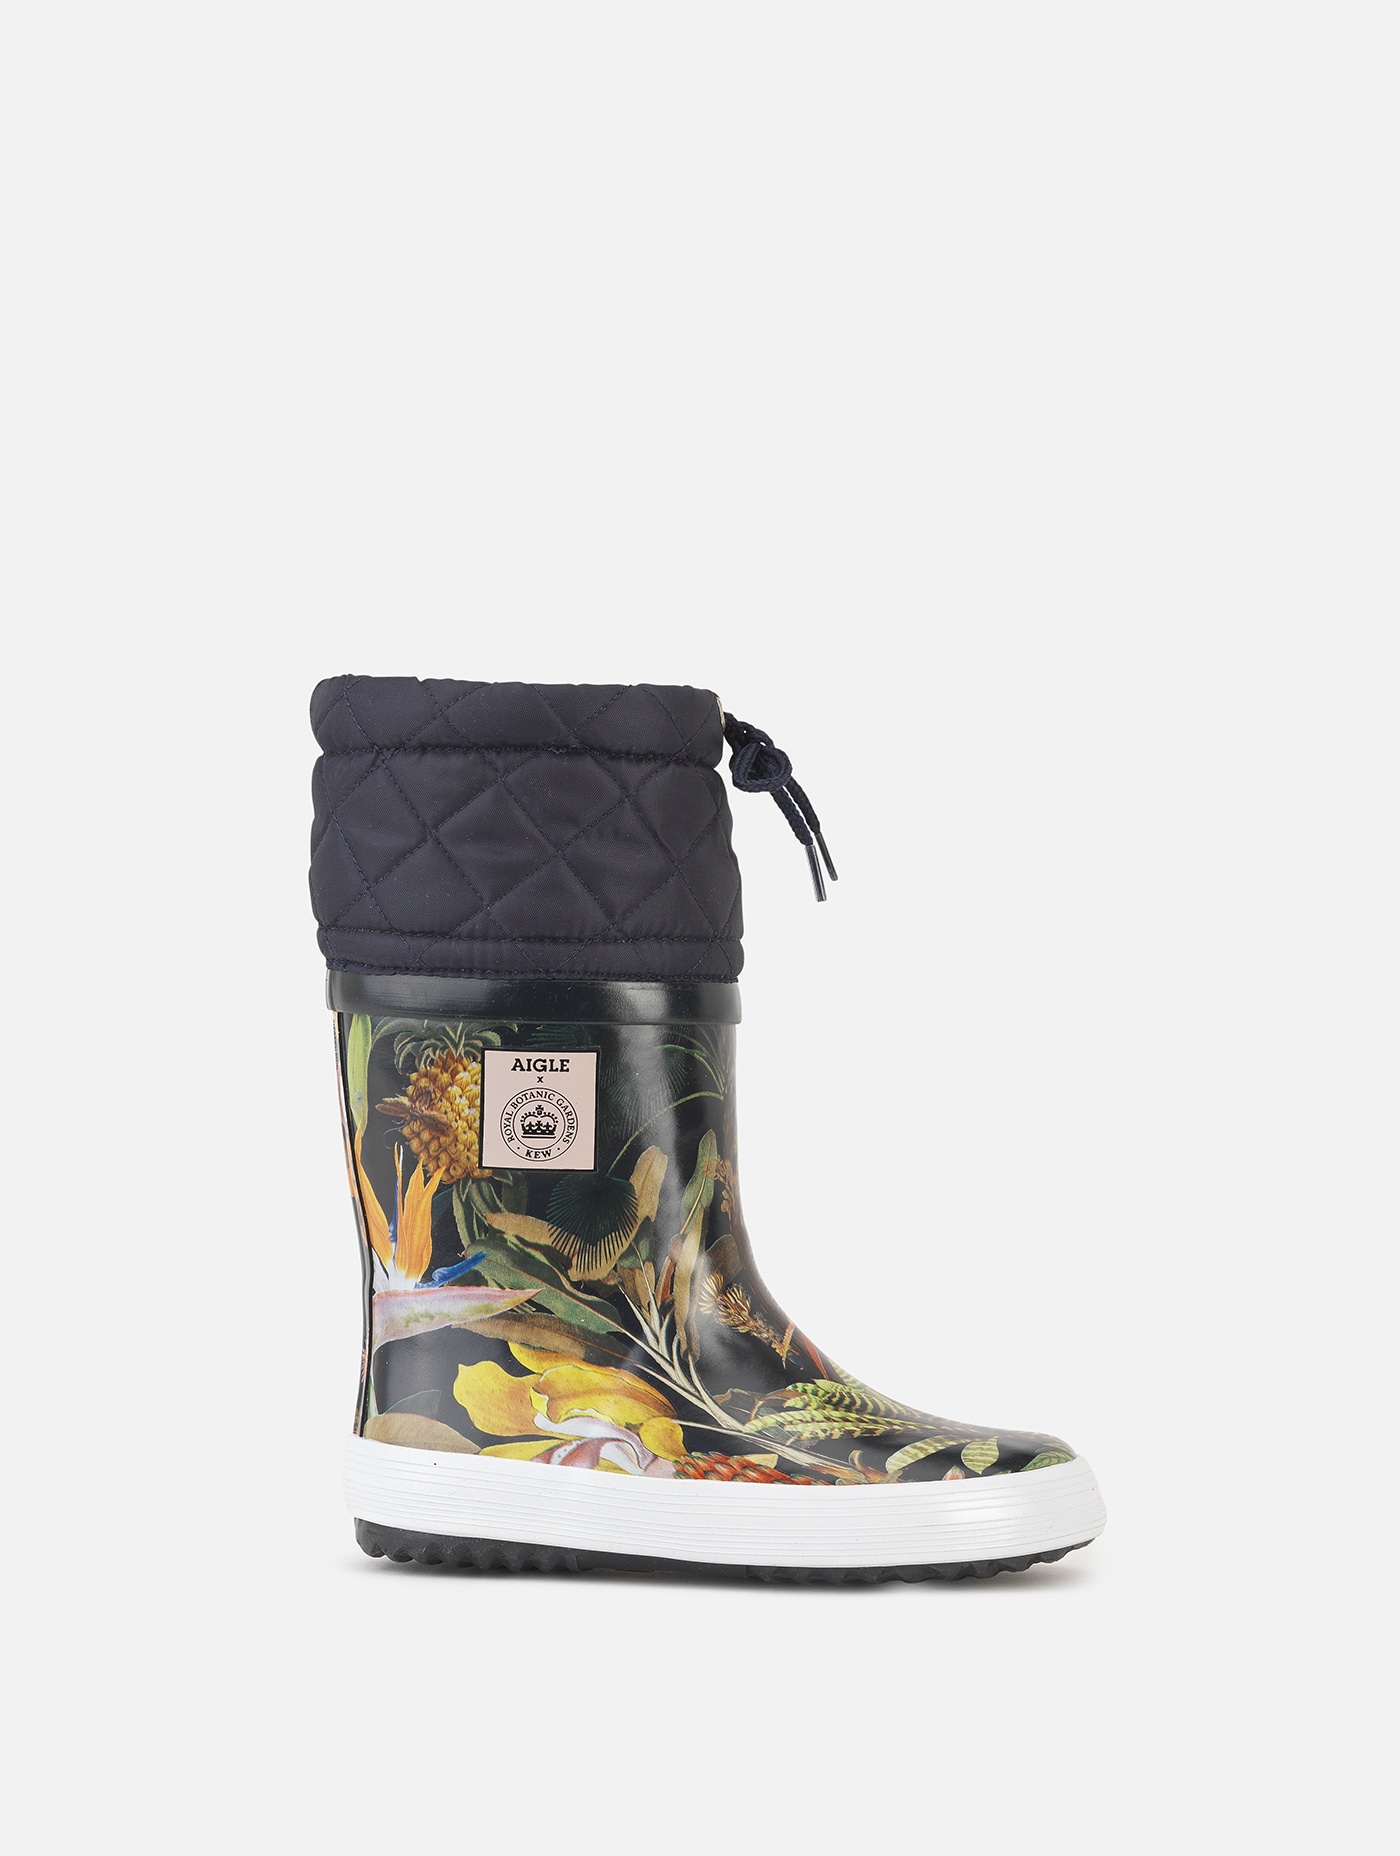 tæmme Puno dominere Aigle - The fur-lined printed children's boot, perfect for cold weather Kew  garden 2 - Giboulee print | AIGLE